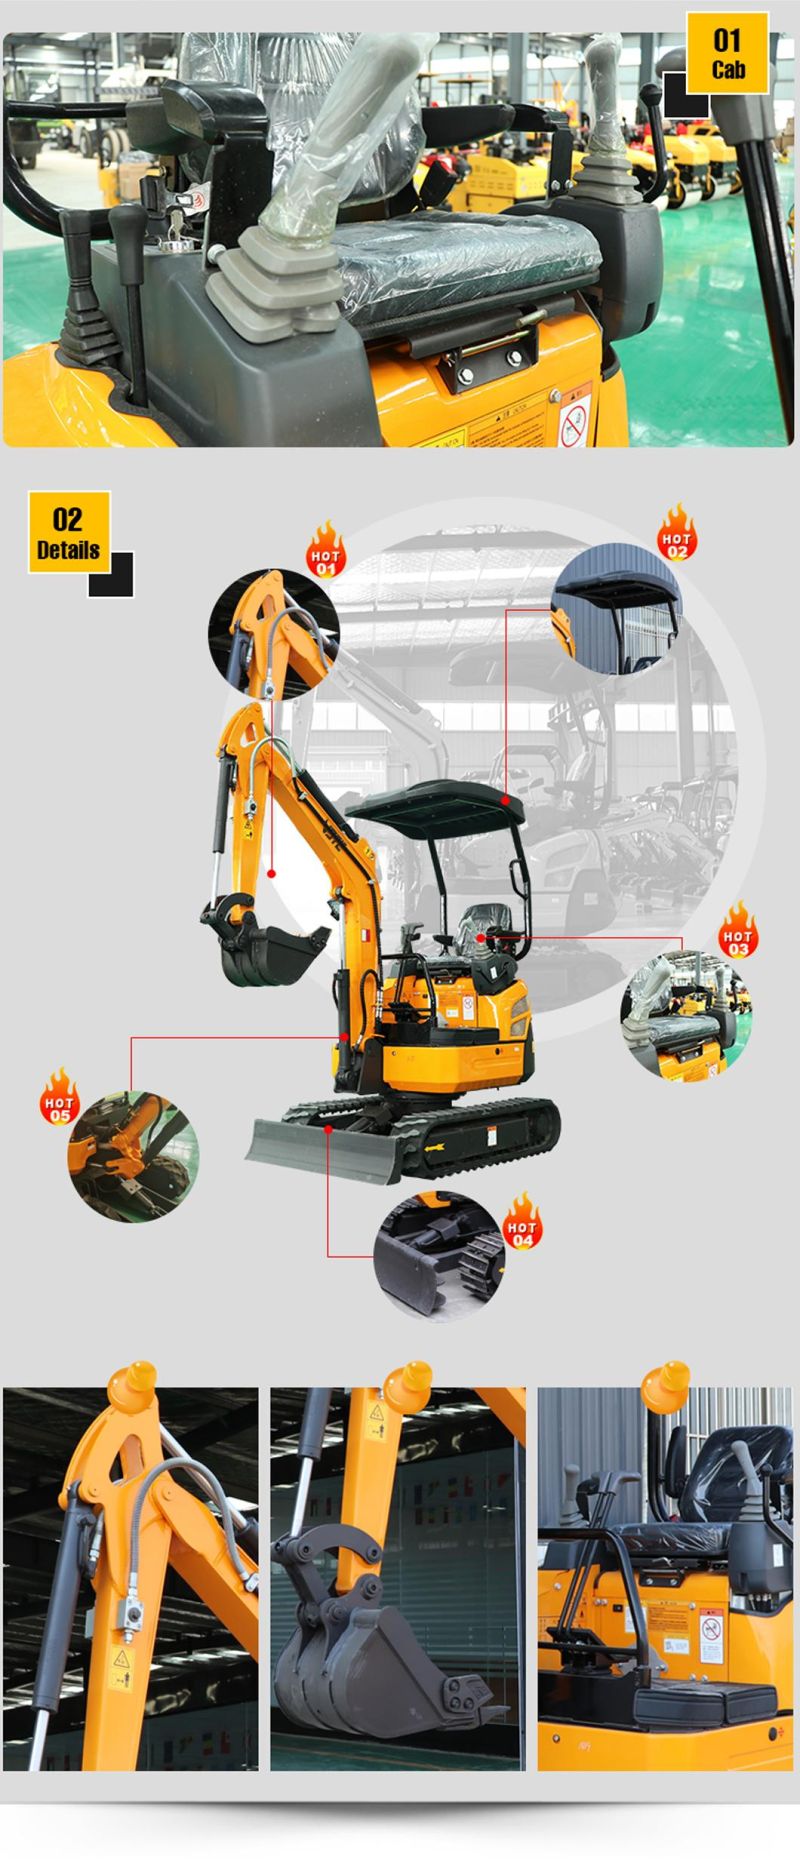 1000kg Hydraulic Mini Excavator Mini Digger with Competitive Prices Meet CE/EPA/Euro 5 Emission